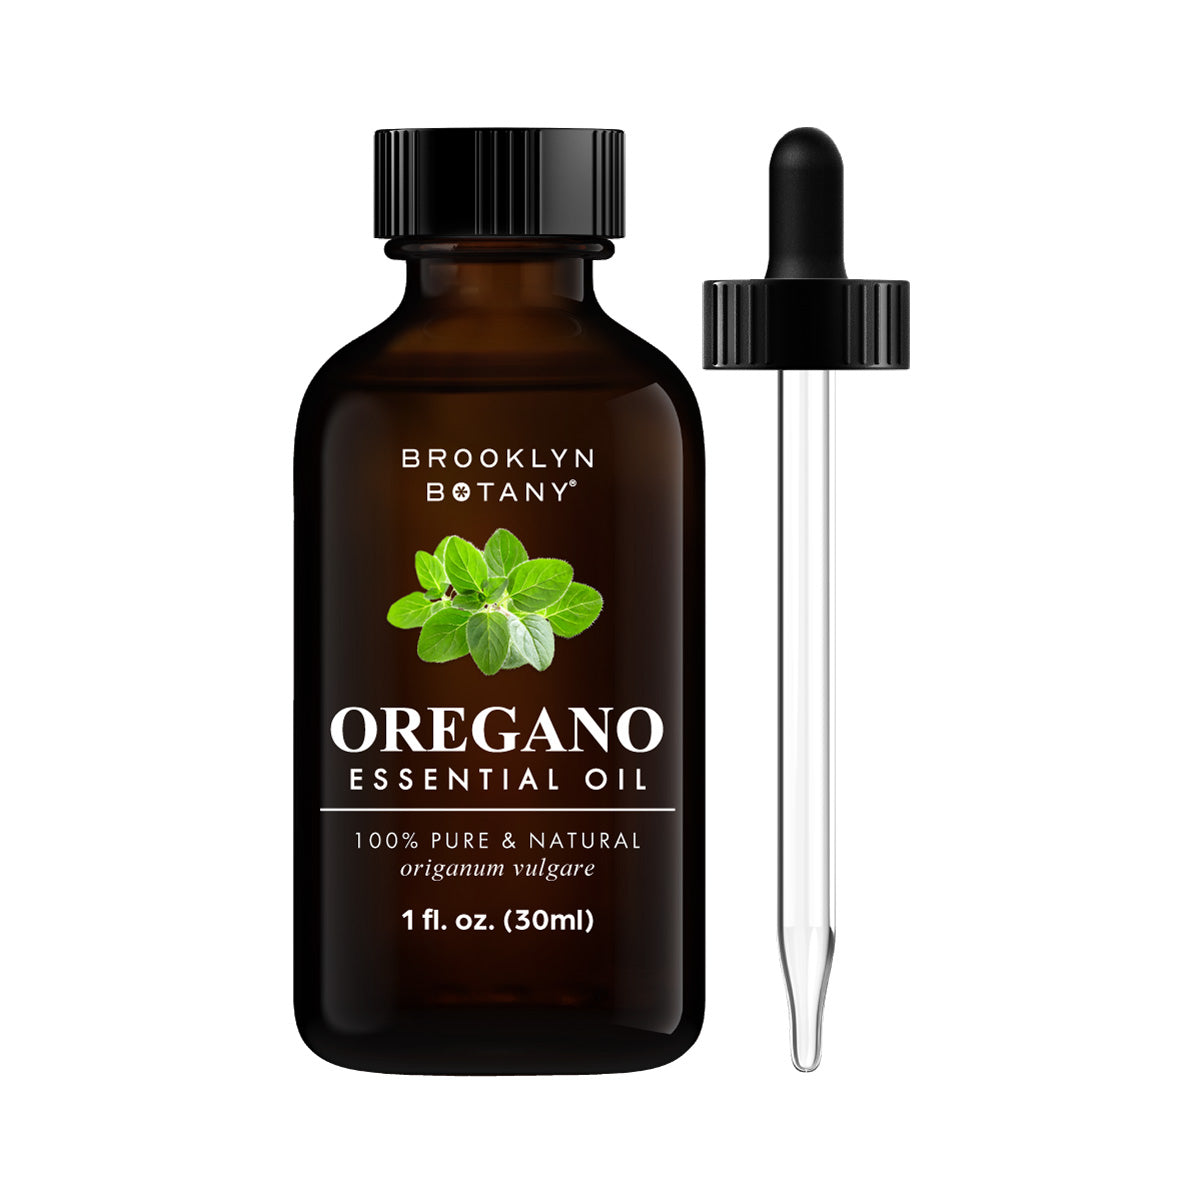 Shopify-BB-30ml-Oregano-Essential-Oil-Main-Image-with-Sides.jpg